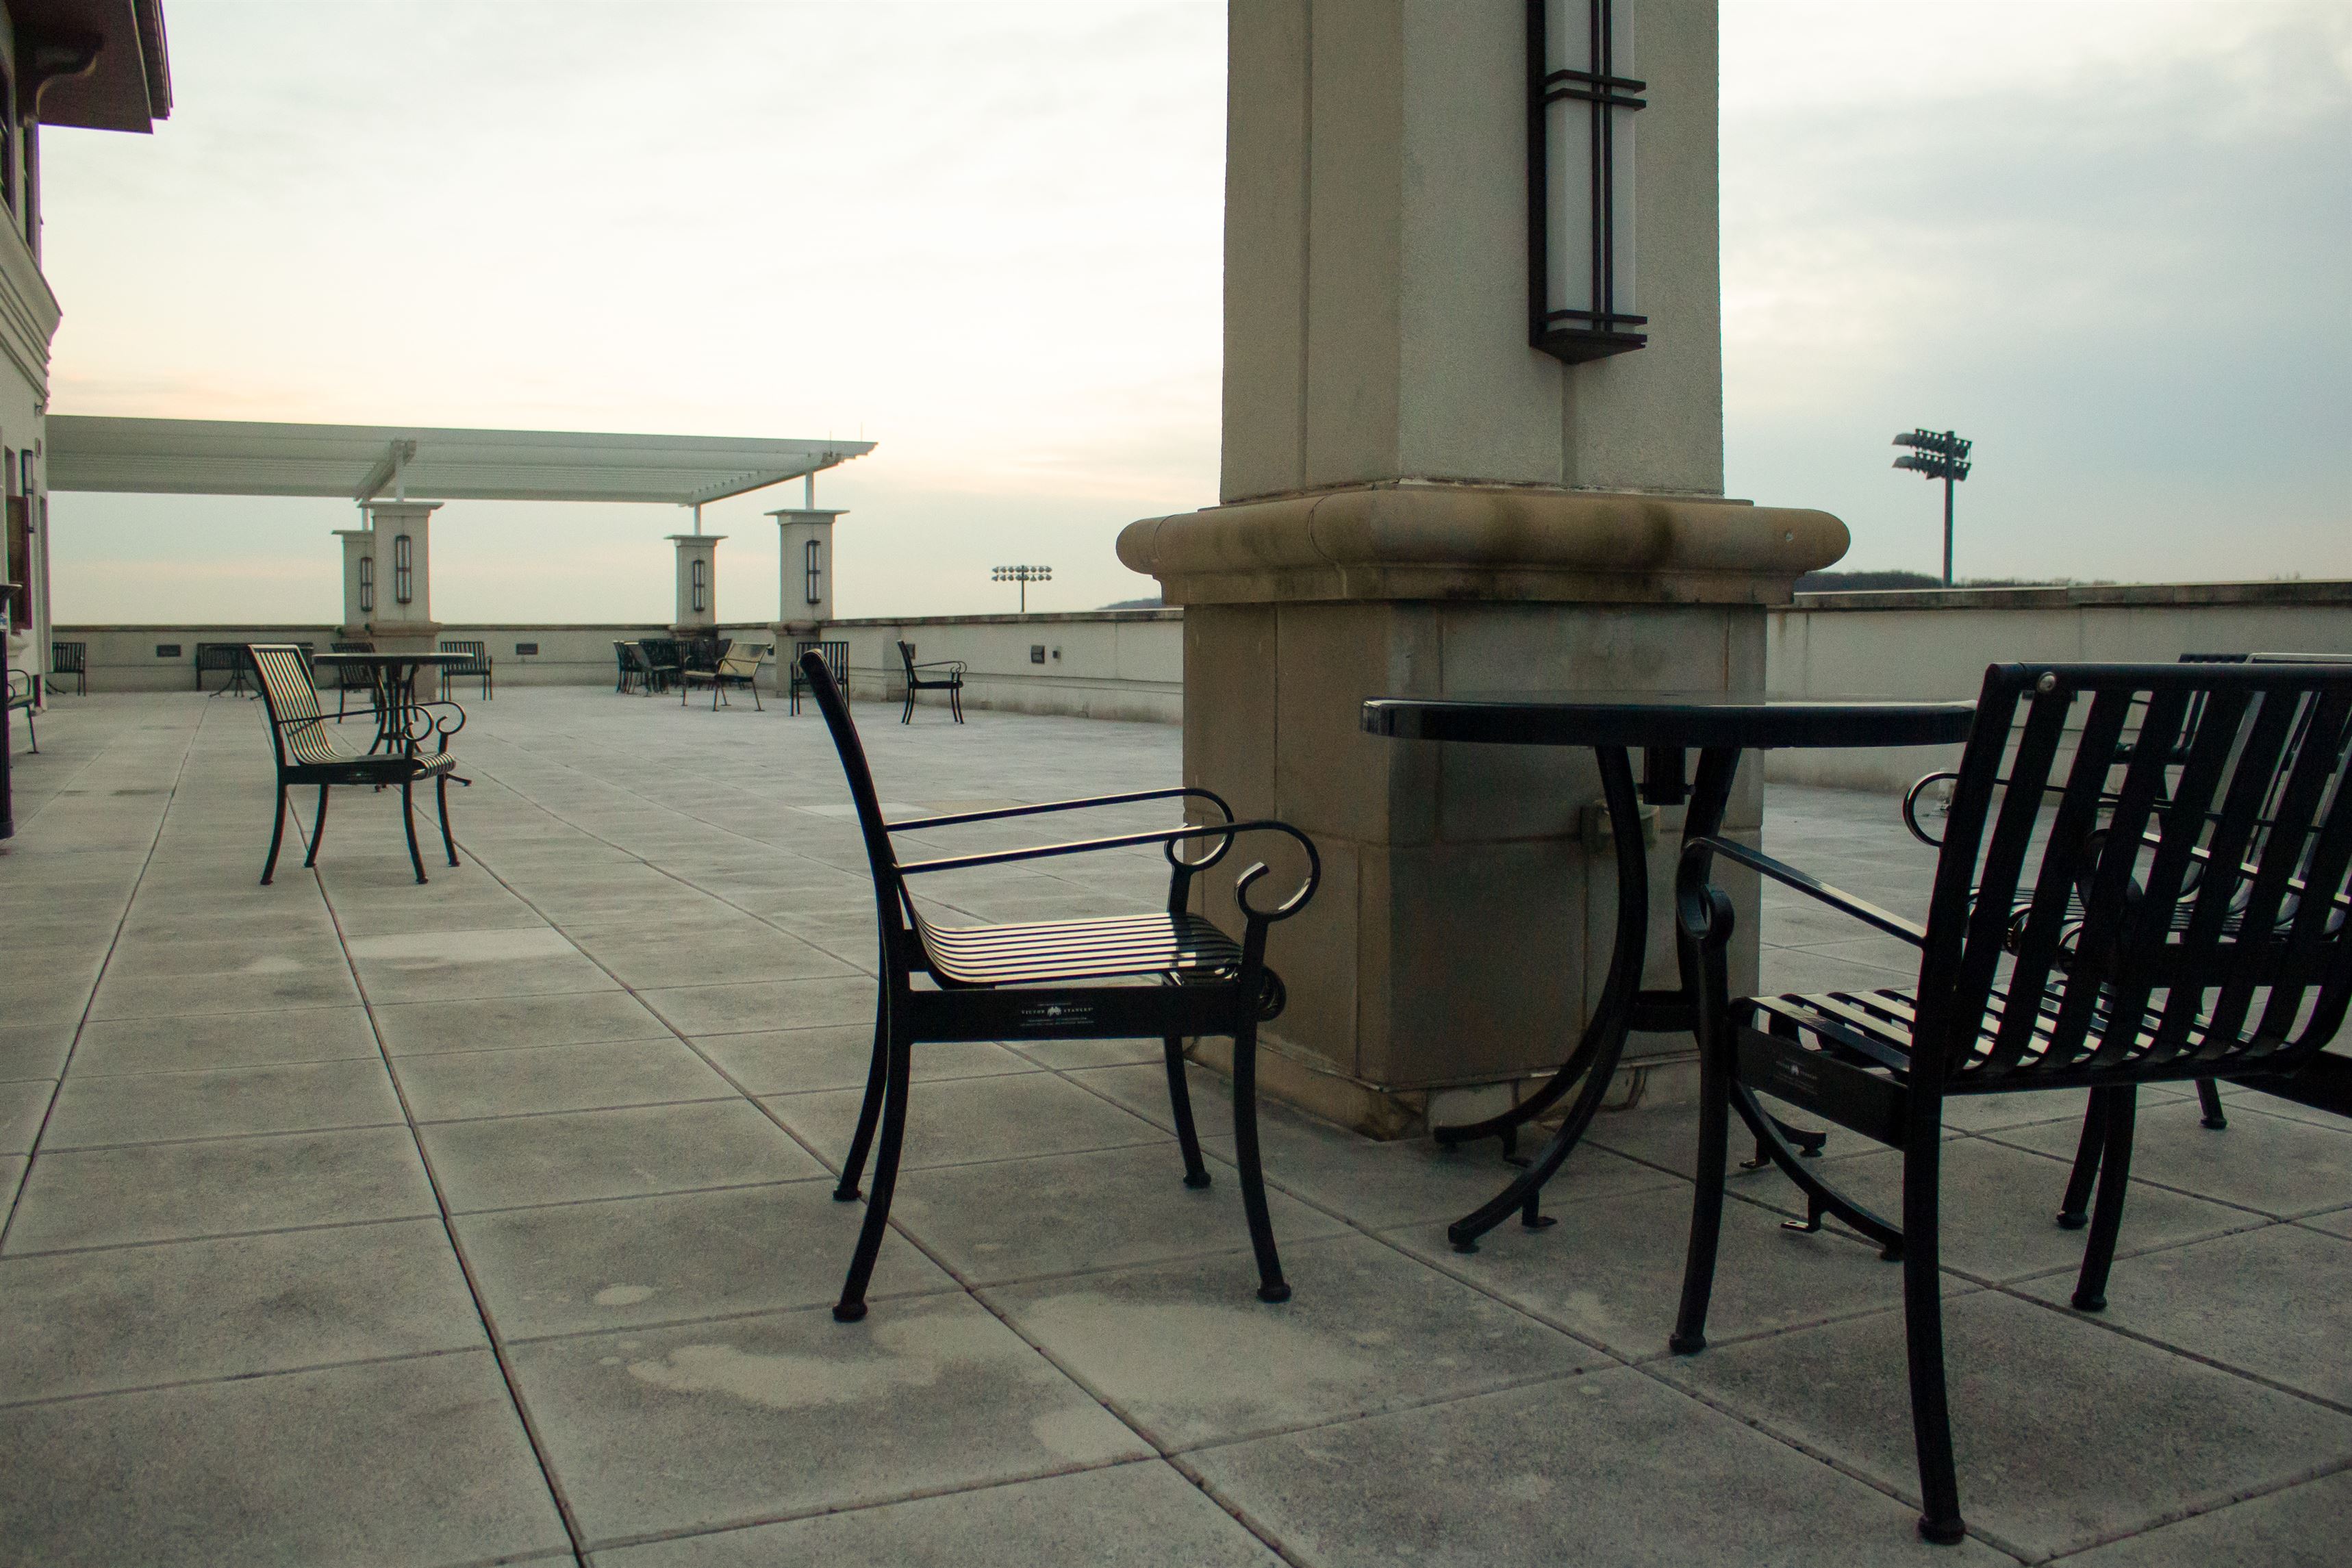 The terrace of the School of Business is a good secluded place for some quiet time with your significant other.
Sal DiMaggio | The Montclarion